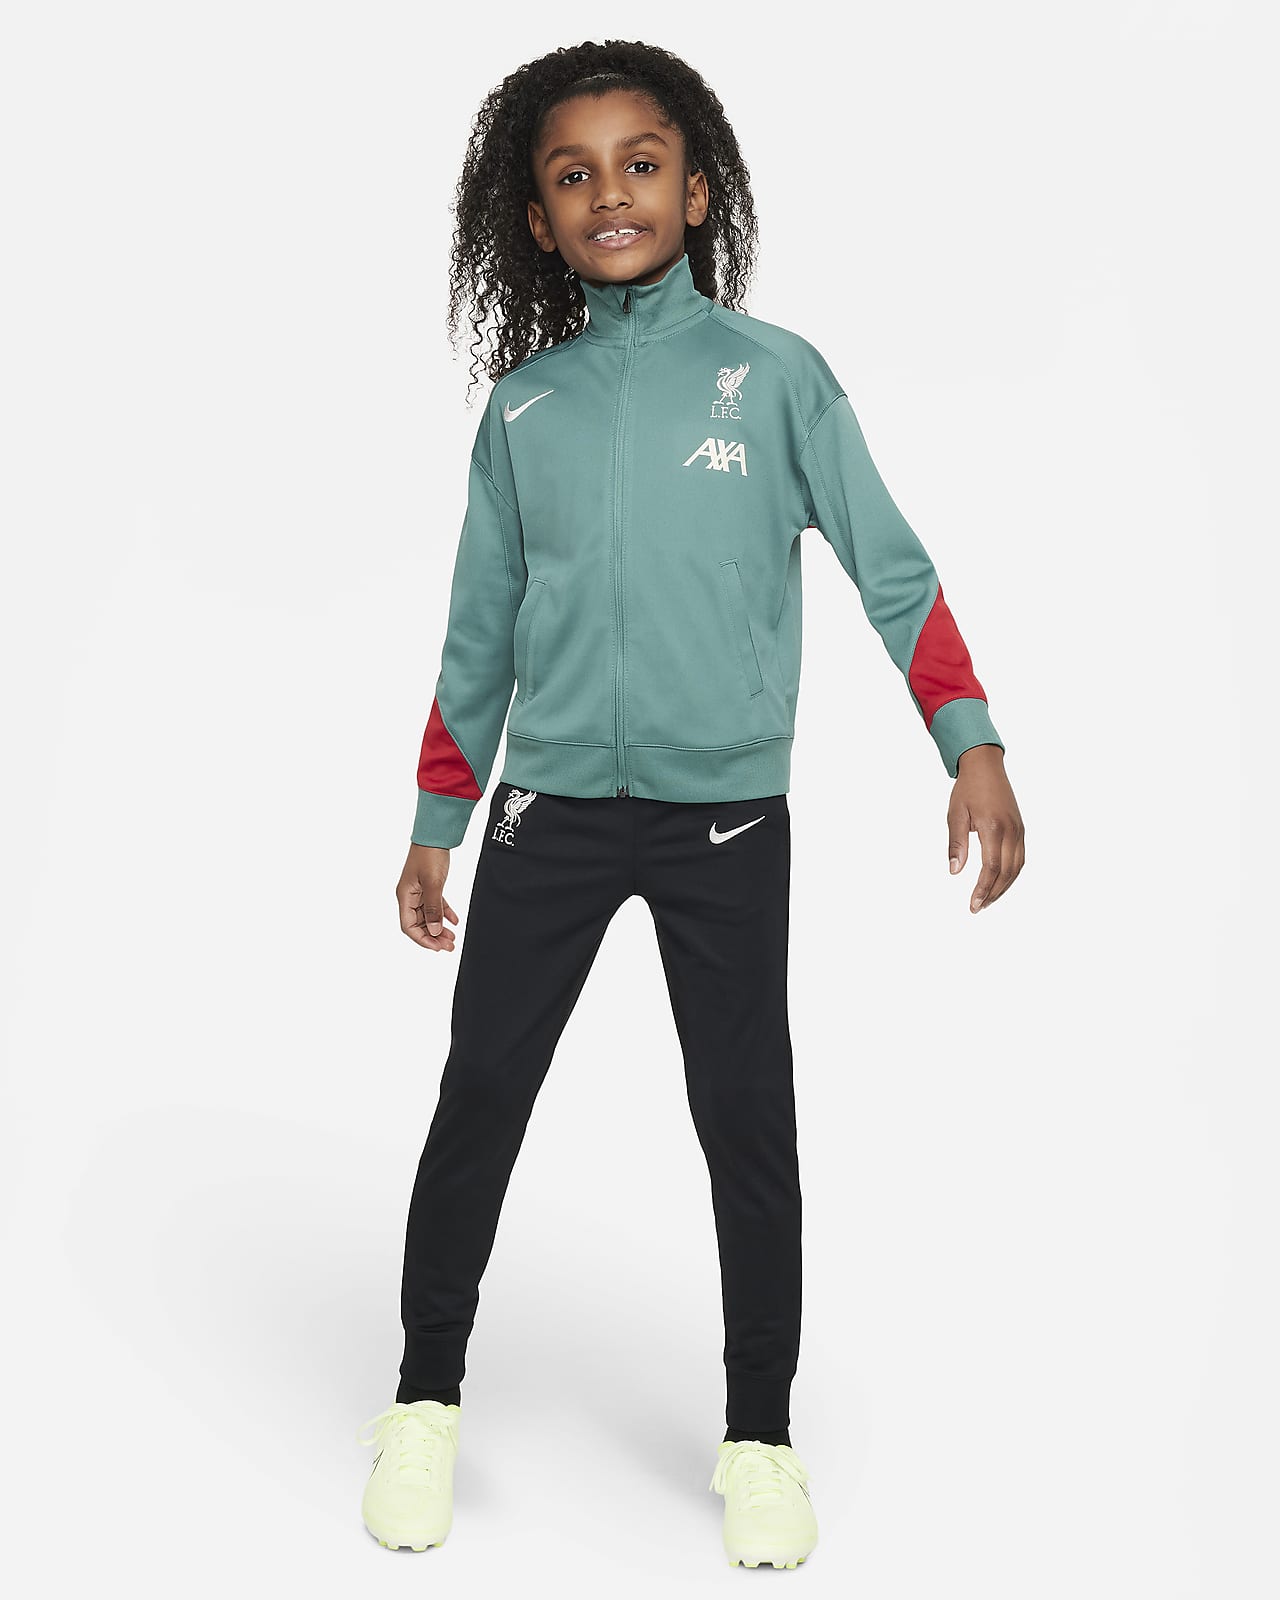 Liverpool F.C. Strike Younger Kids' Nike Dri-FIT Football Knit Tracksuit